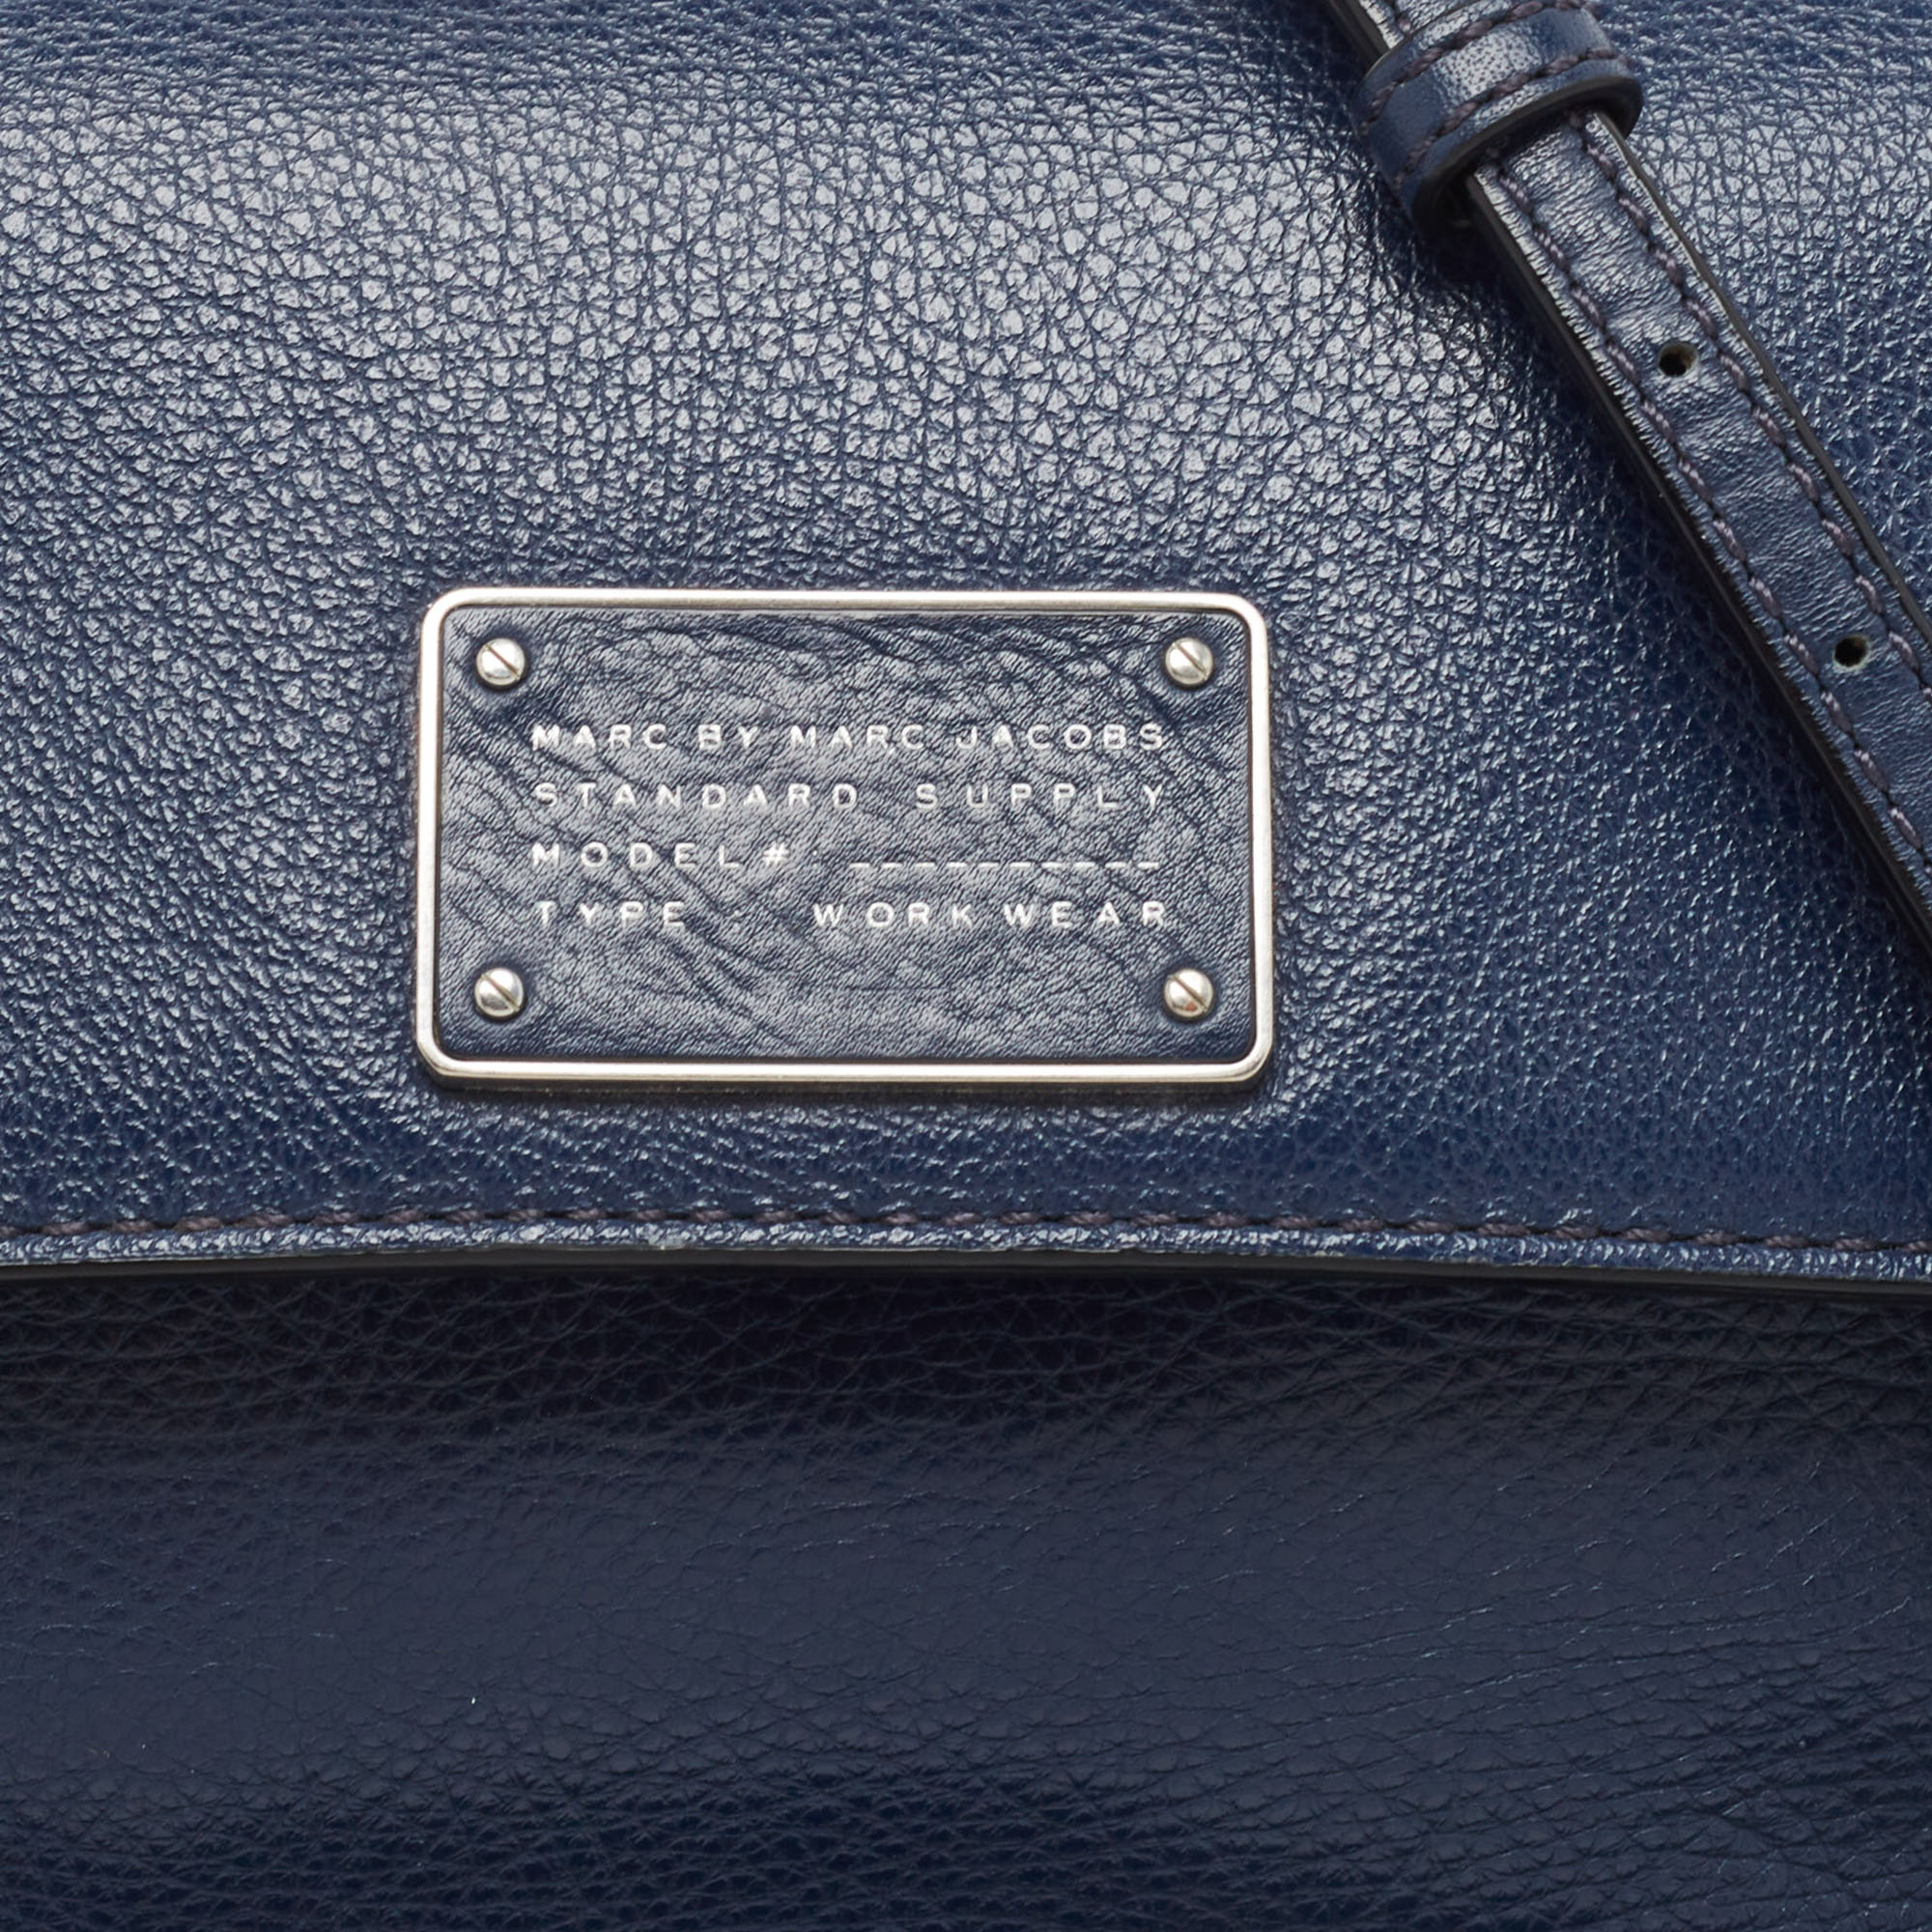 Marc Jacobs Navy Blue Leather Too Hot To Handle Noa Crossbody Bag